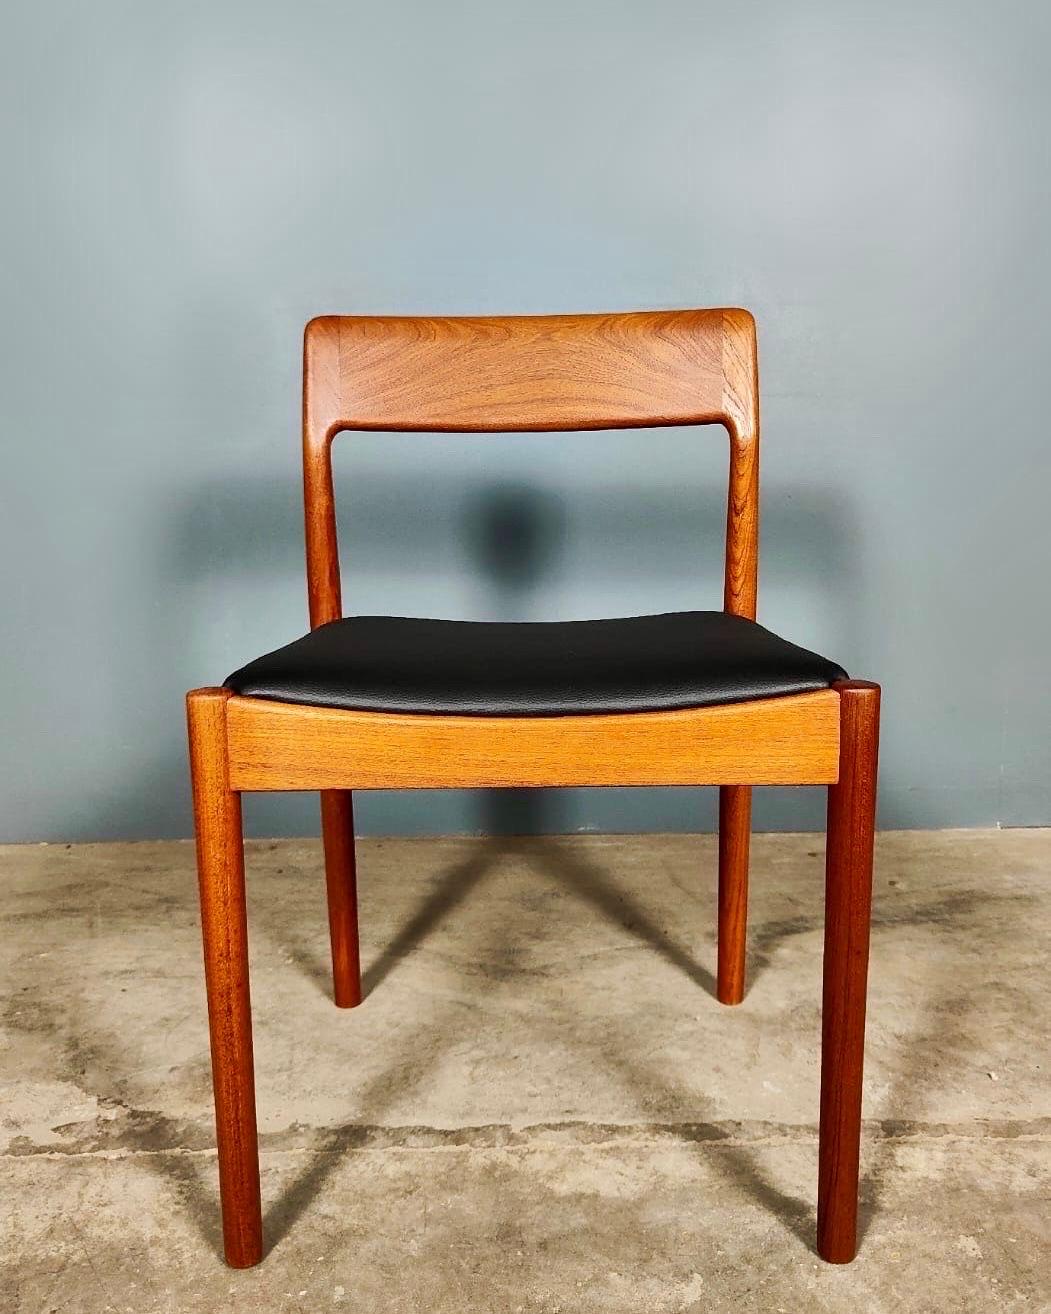 5 x Johannes Nørgaard For Nørgaards Møbelfabrik Teak Dining Chairs Mid Century In Excellent Condition For Sale In Cambridge, GB